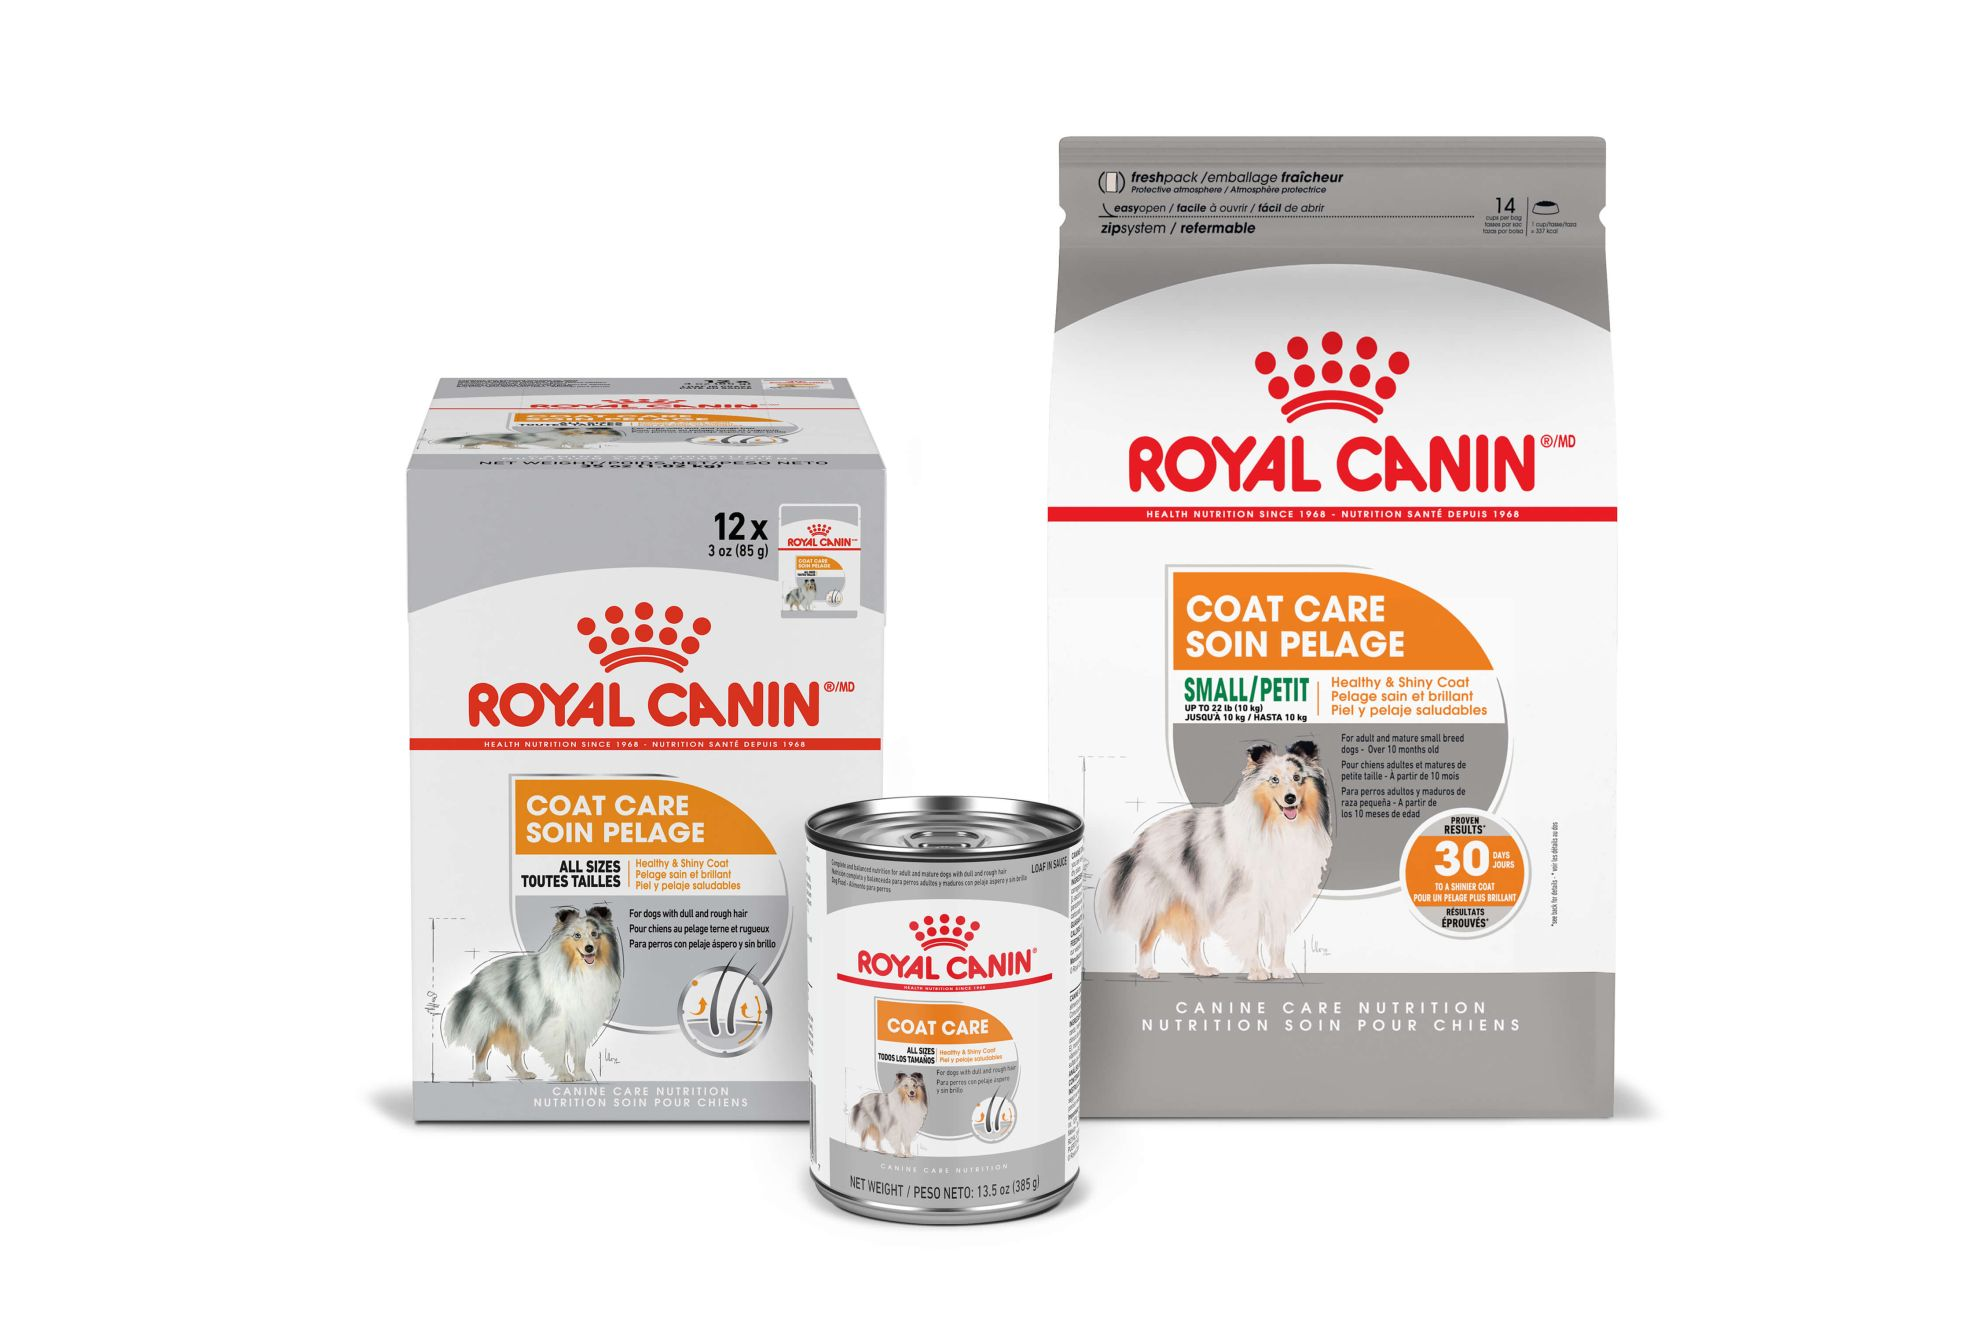 Royal Canin Coat Care Range of Products